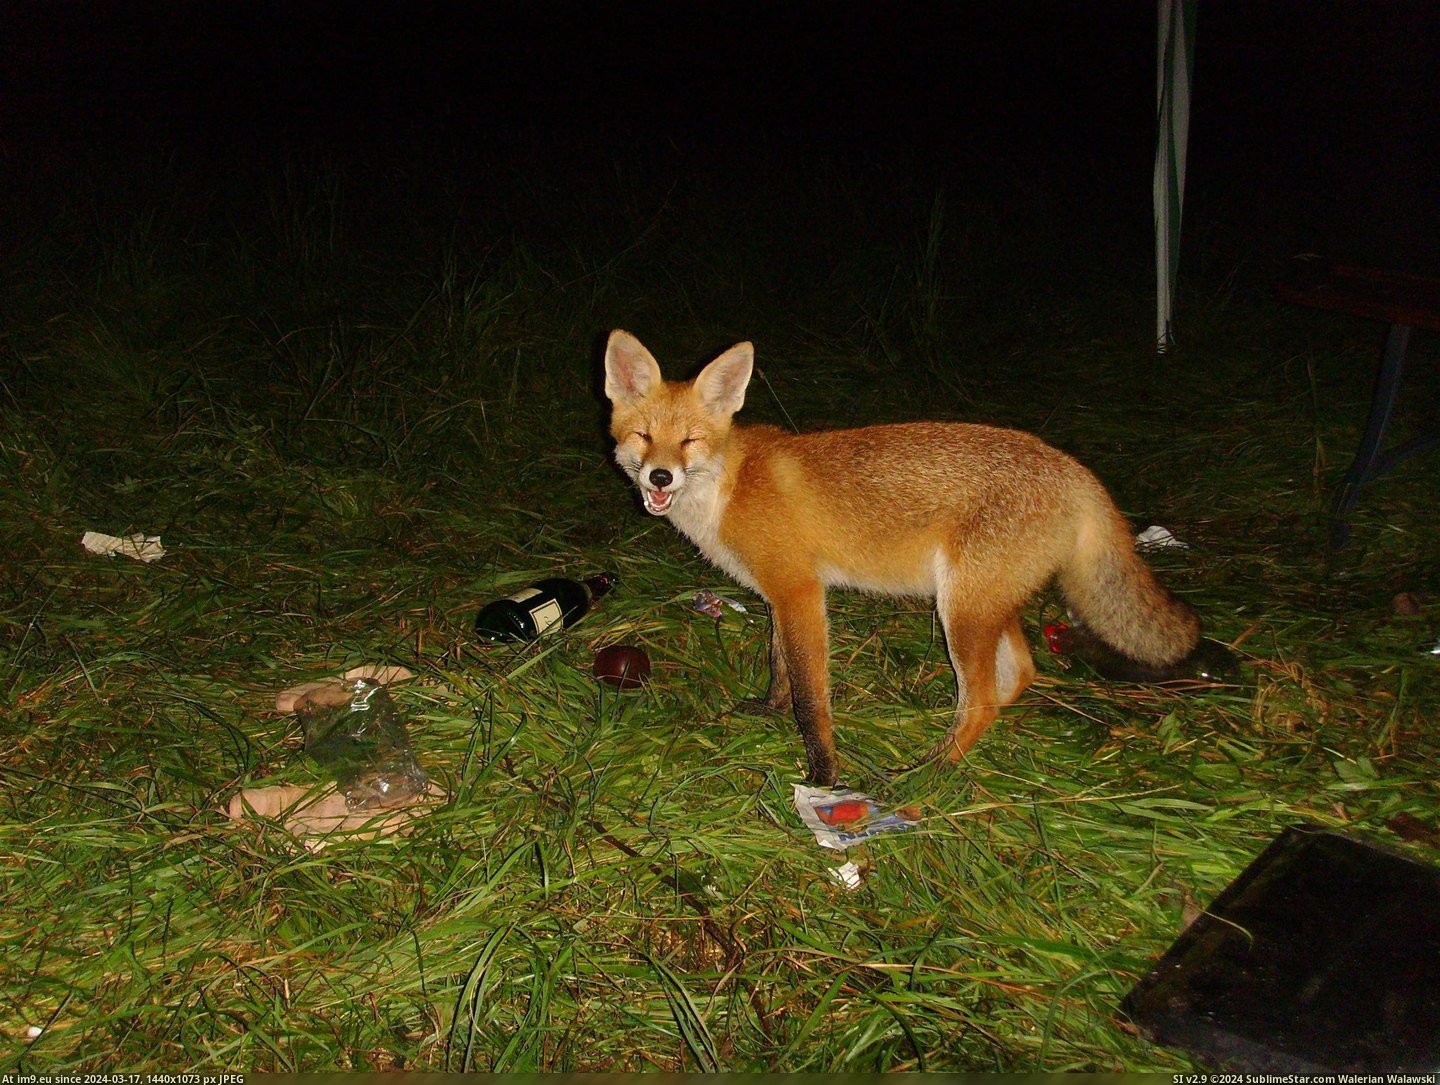 #Happy #Night #Long #Appears #Campfire #Partying #Fox #Hanging #Suddenly [Aww] After a long night of partying, hanging around the campfire, when suddenly Happy Fox appears. Pic. (Bild von album My r/AWW favs))